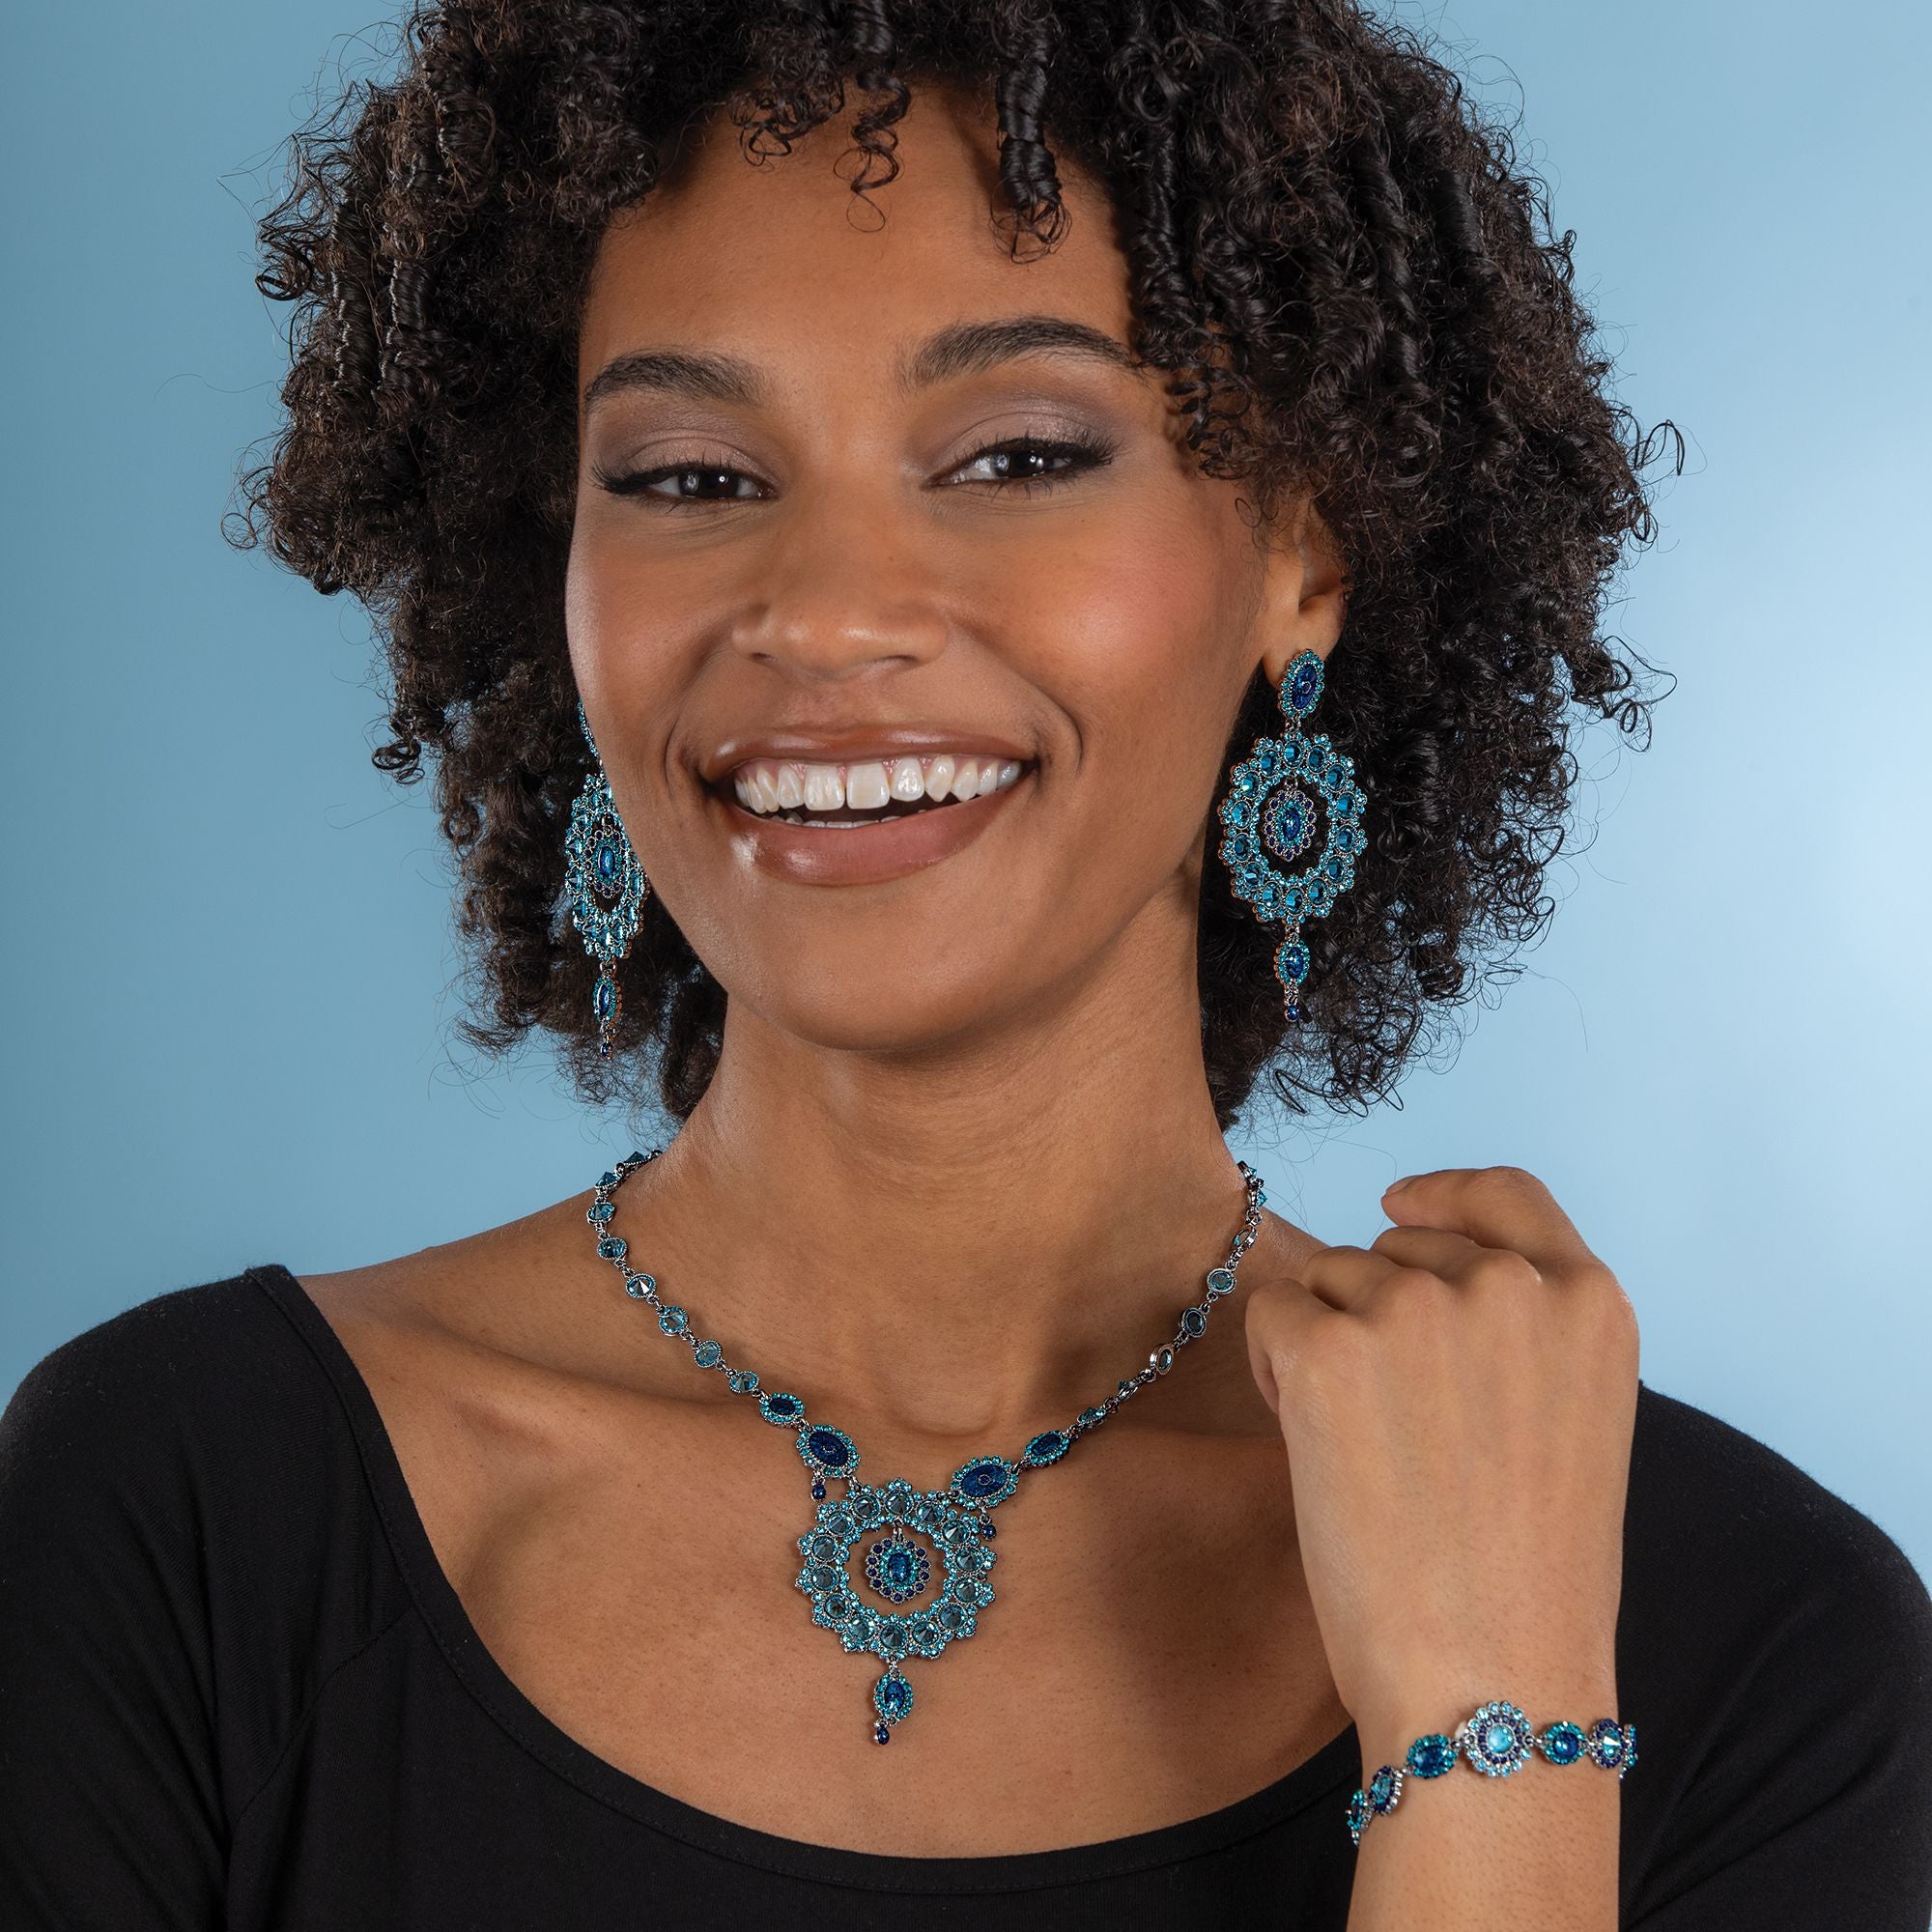 Hues Of Blue Filigree Necklace